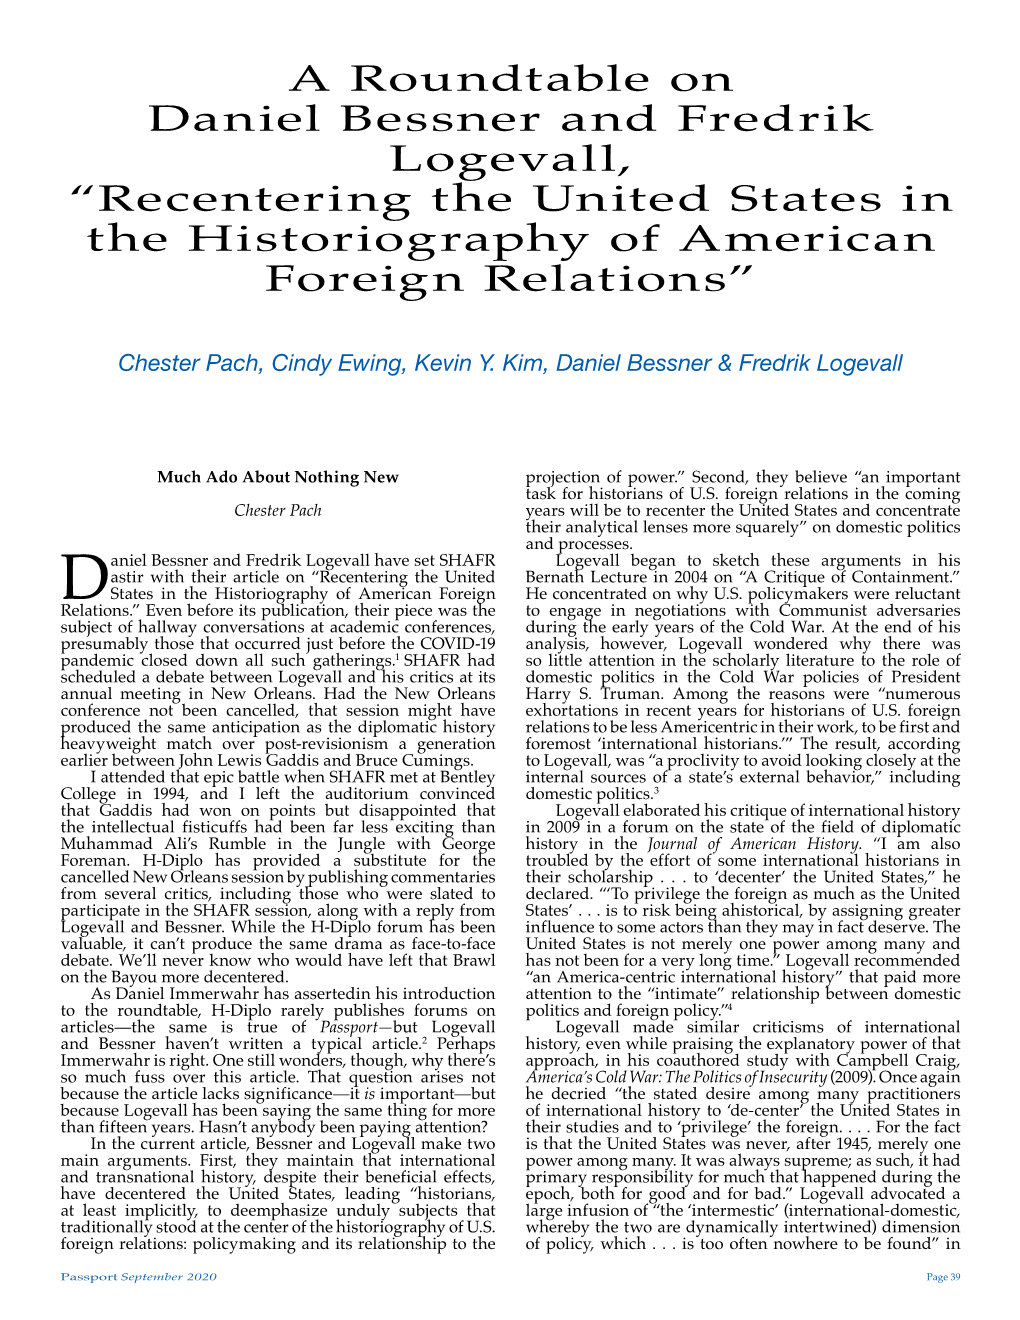 A Roundtable on Daniel Bessner and Fredrik Logevall, “Recentering the United States in the Historiography of American Foreign Relations”